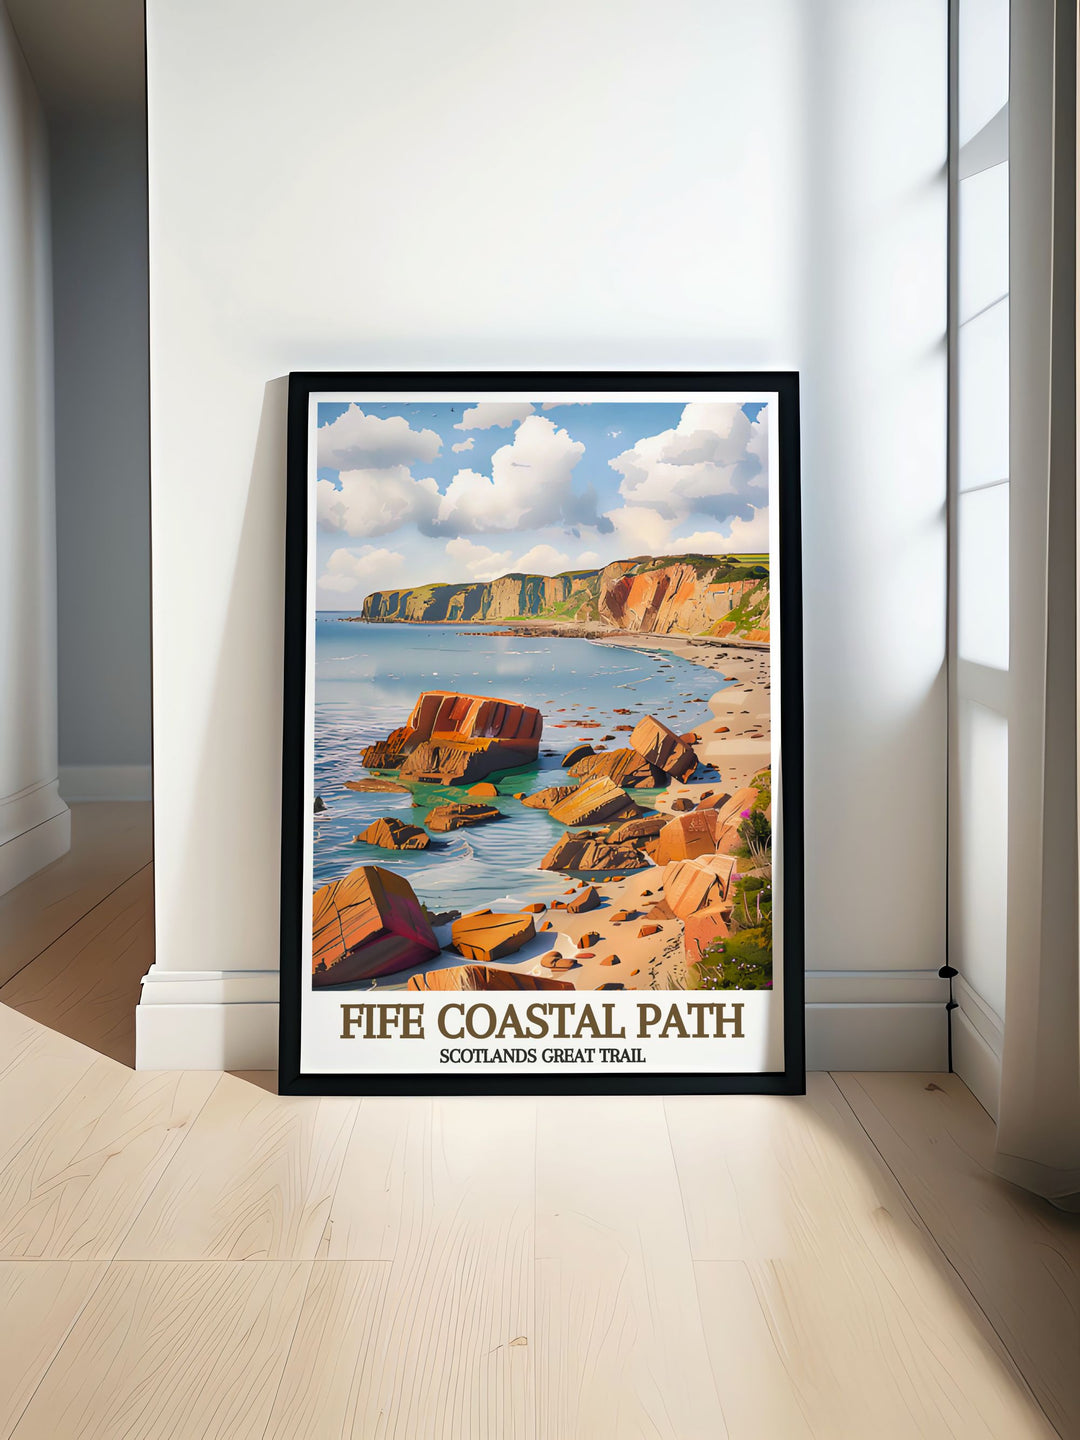 This art print showcases the iconic Fife Coastal Path and its dramatic cliffs, perfect for enhancing any home or office decor.